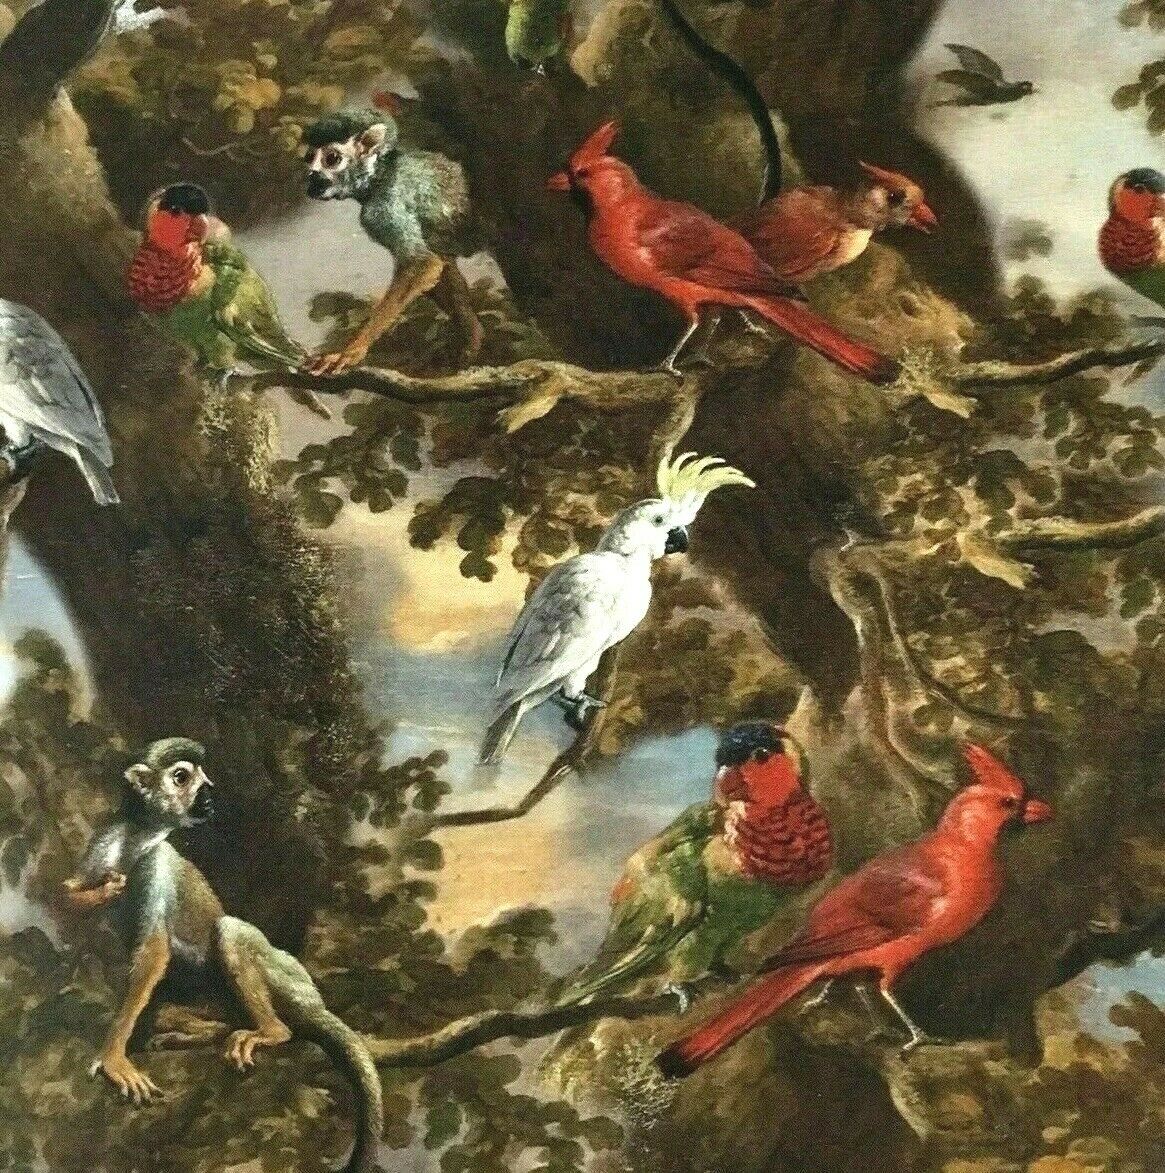 Golden Age Beasties Birds Cotton Fabric By The Meter Artistic Printed Sewing Material Flora Fauna Monkeys Textile for cushions upholstery arts crafts